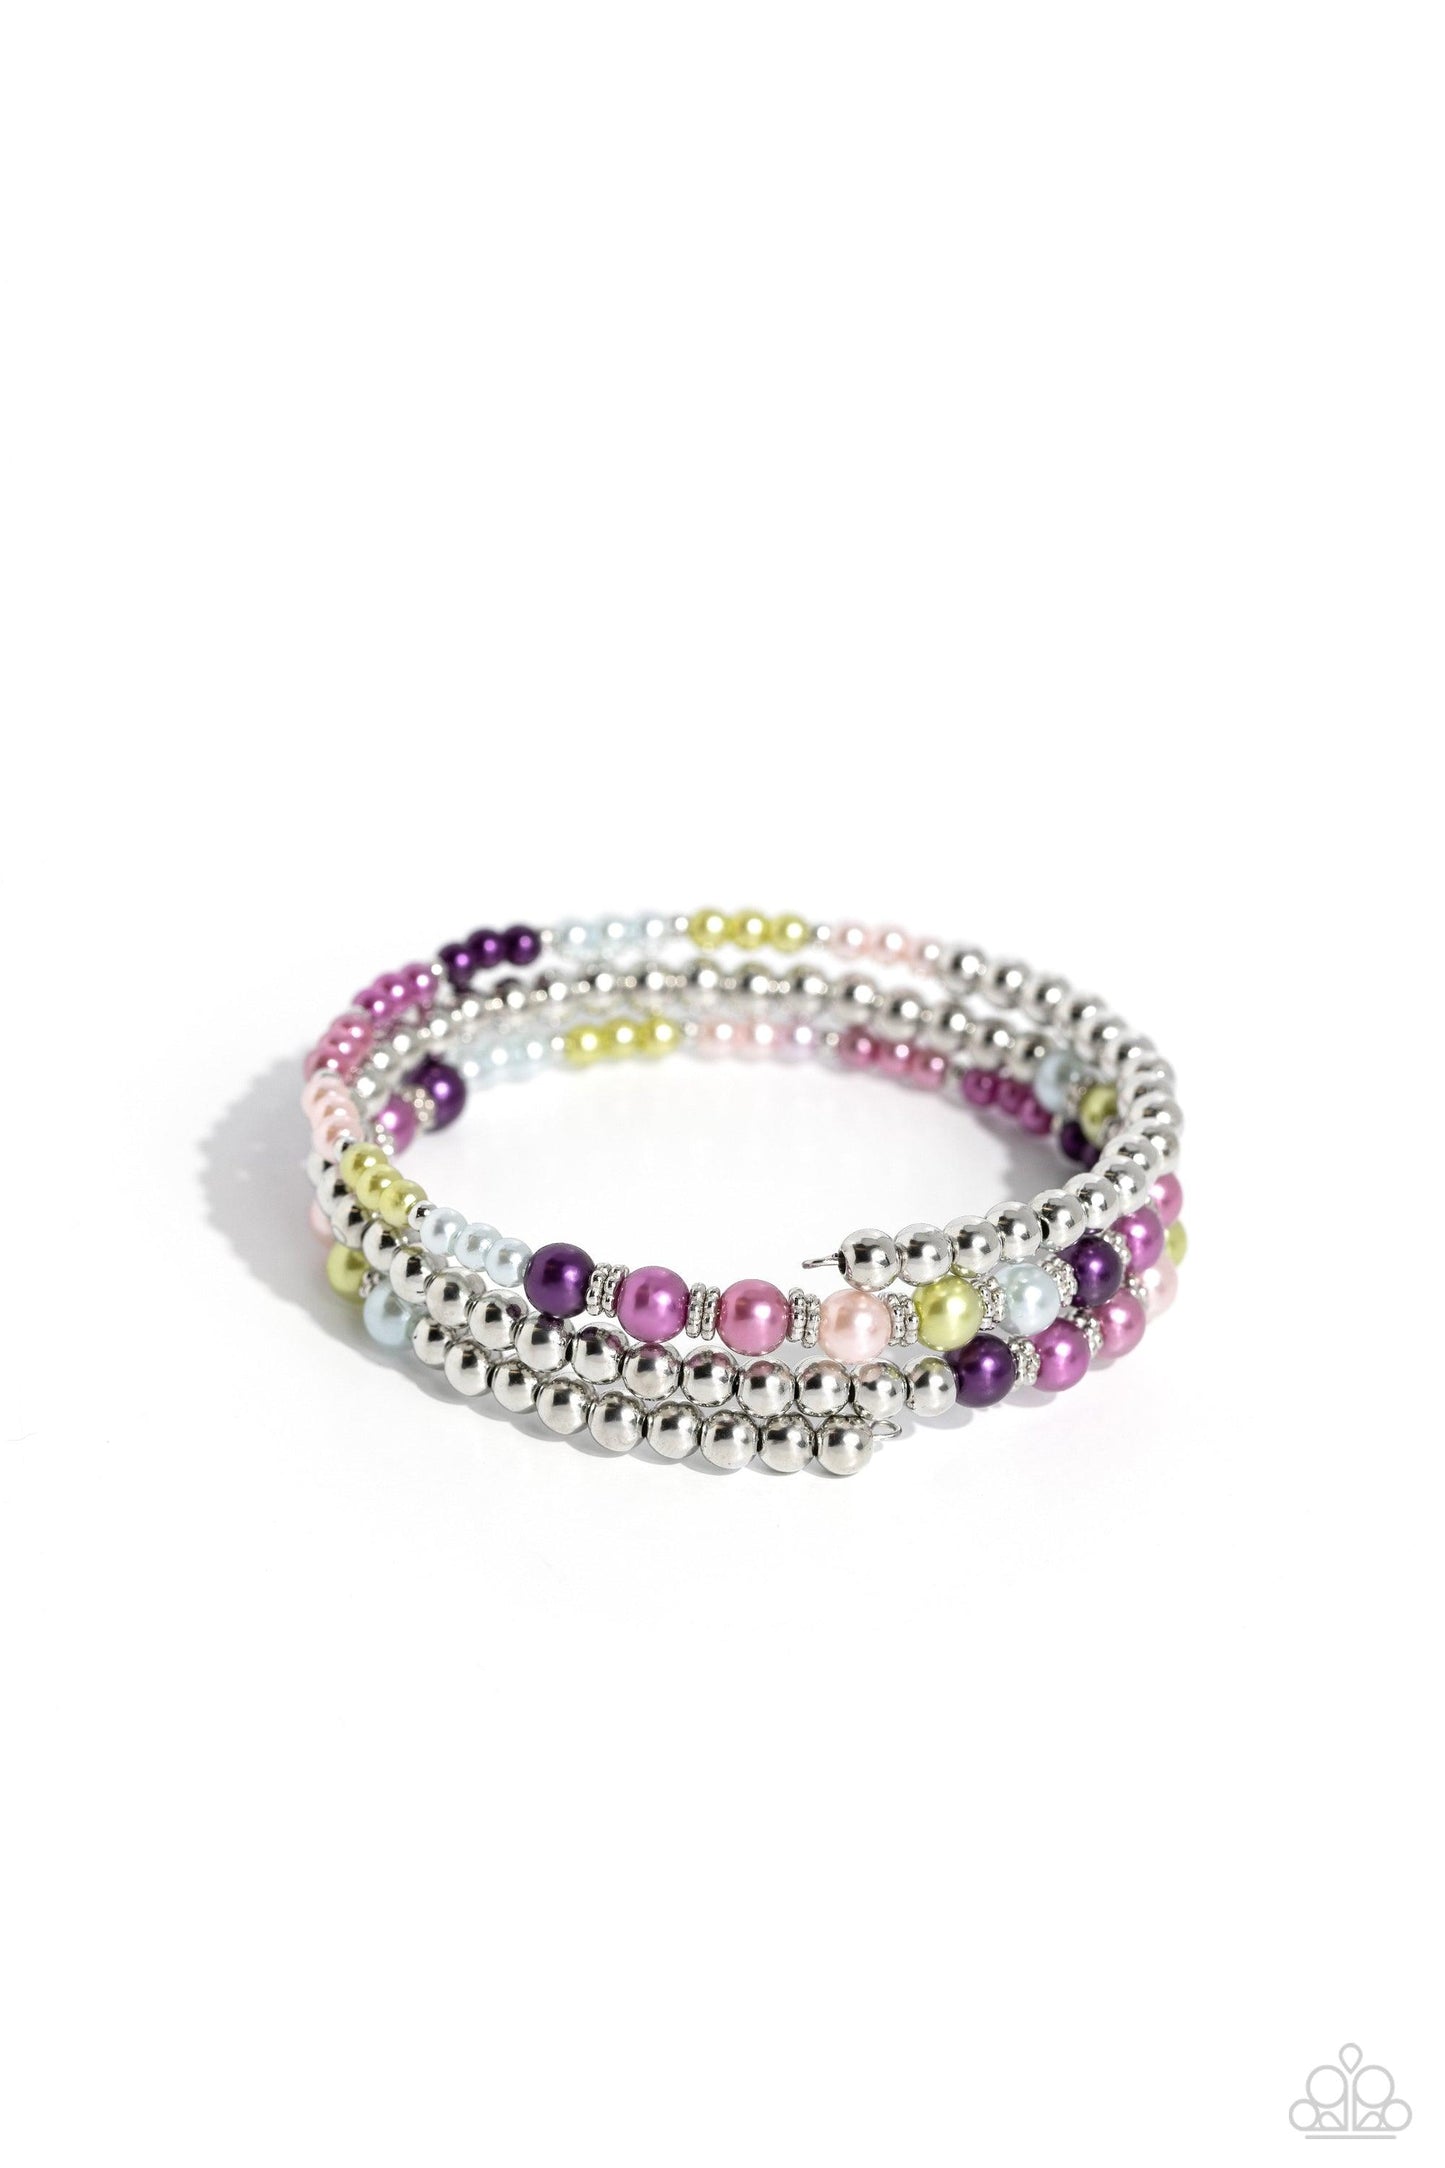 Paparazzi Accessories - Just SASSING Through - Multicolor Bracelet - Bling by JessieK